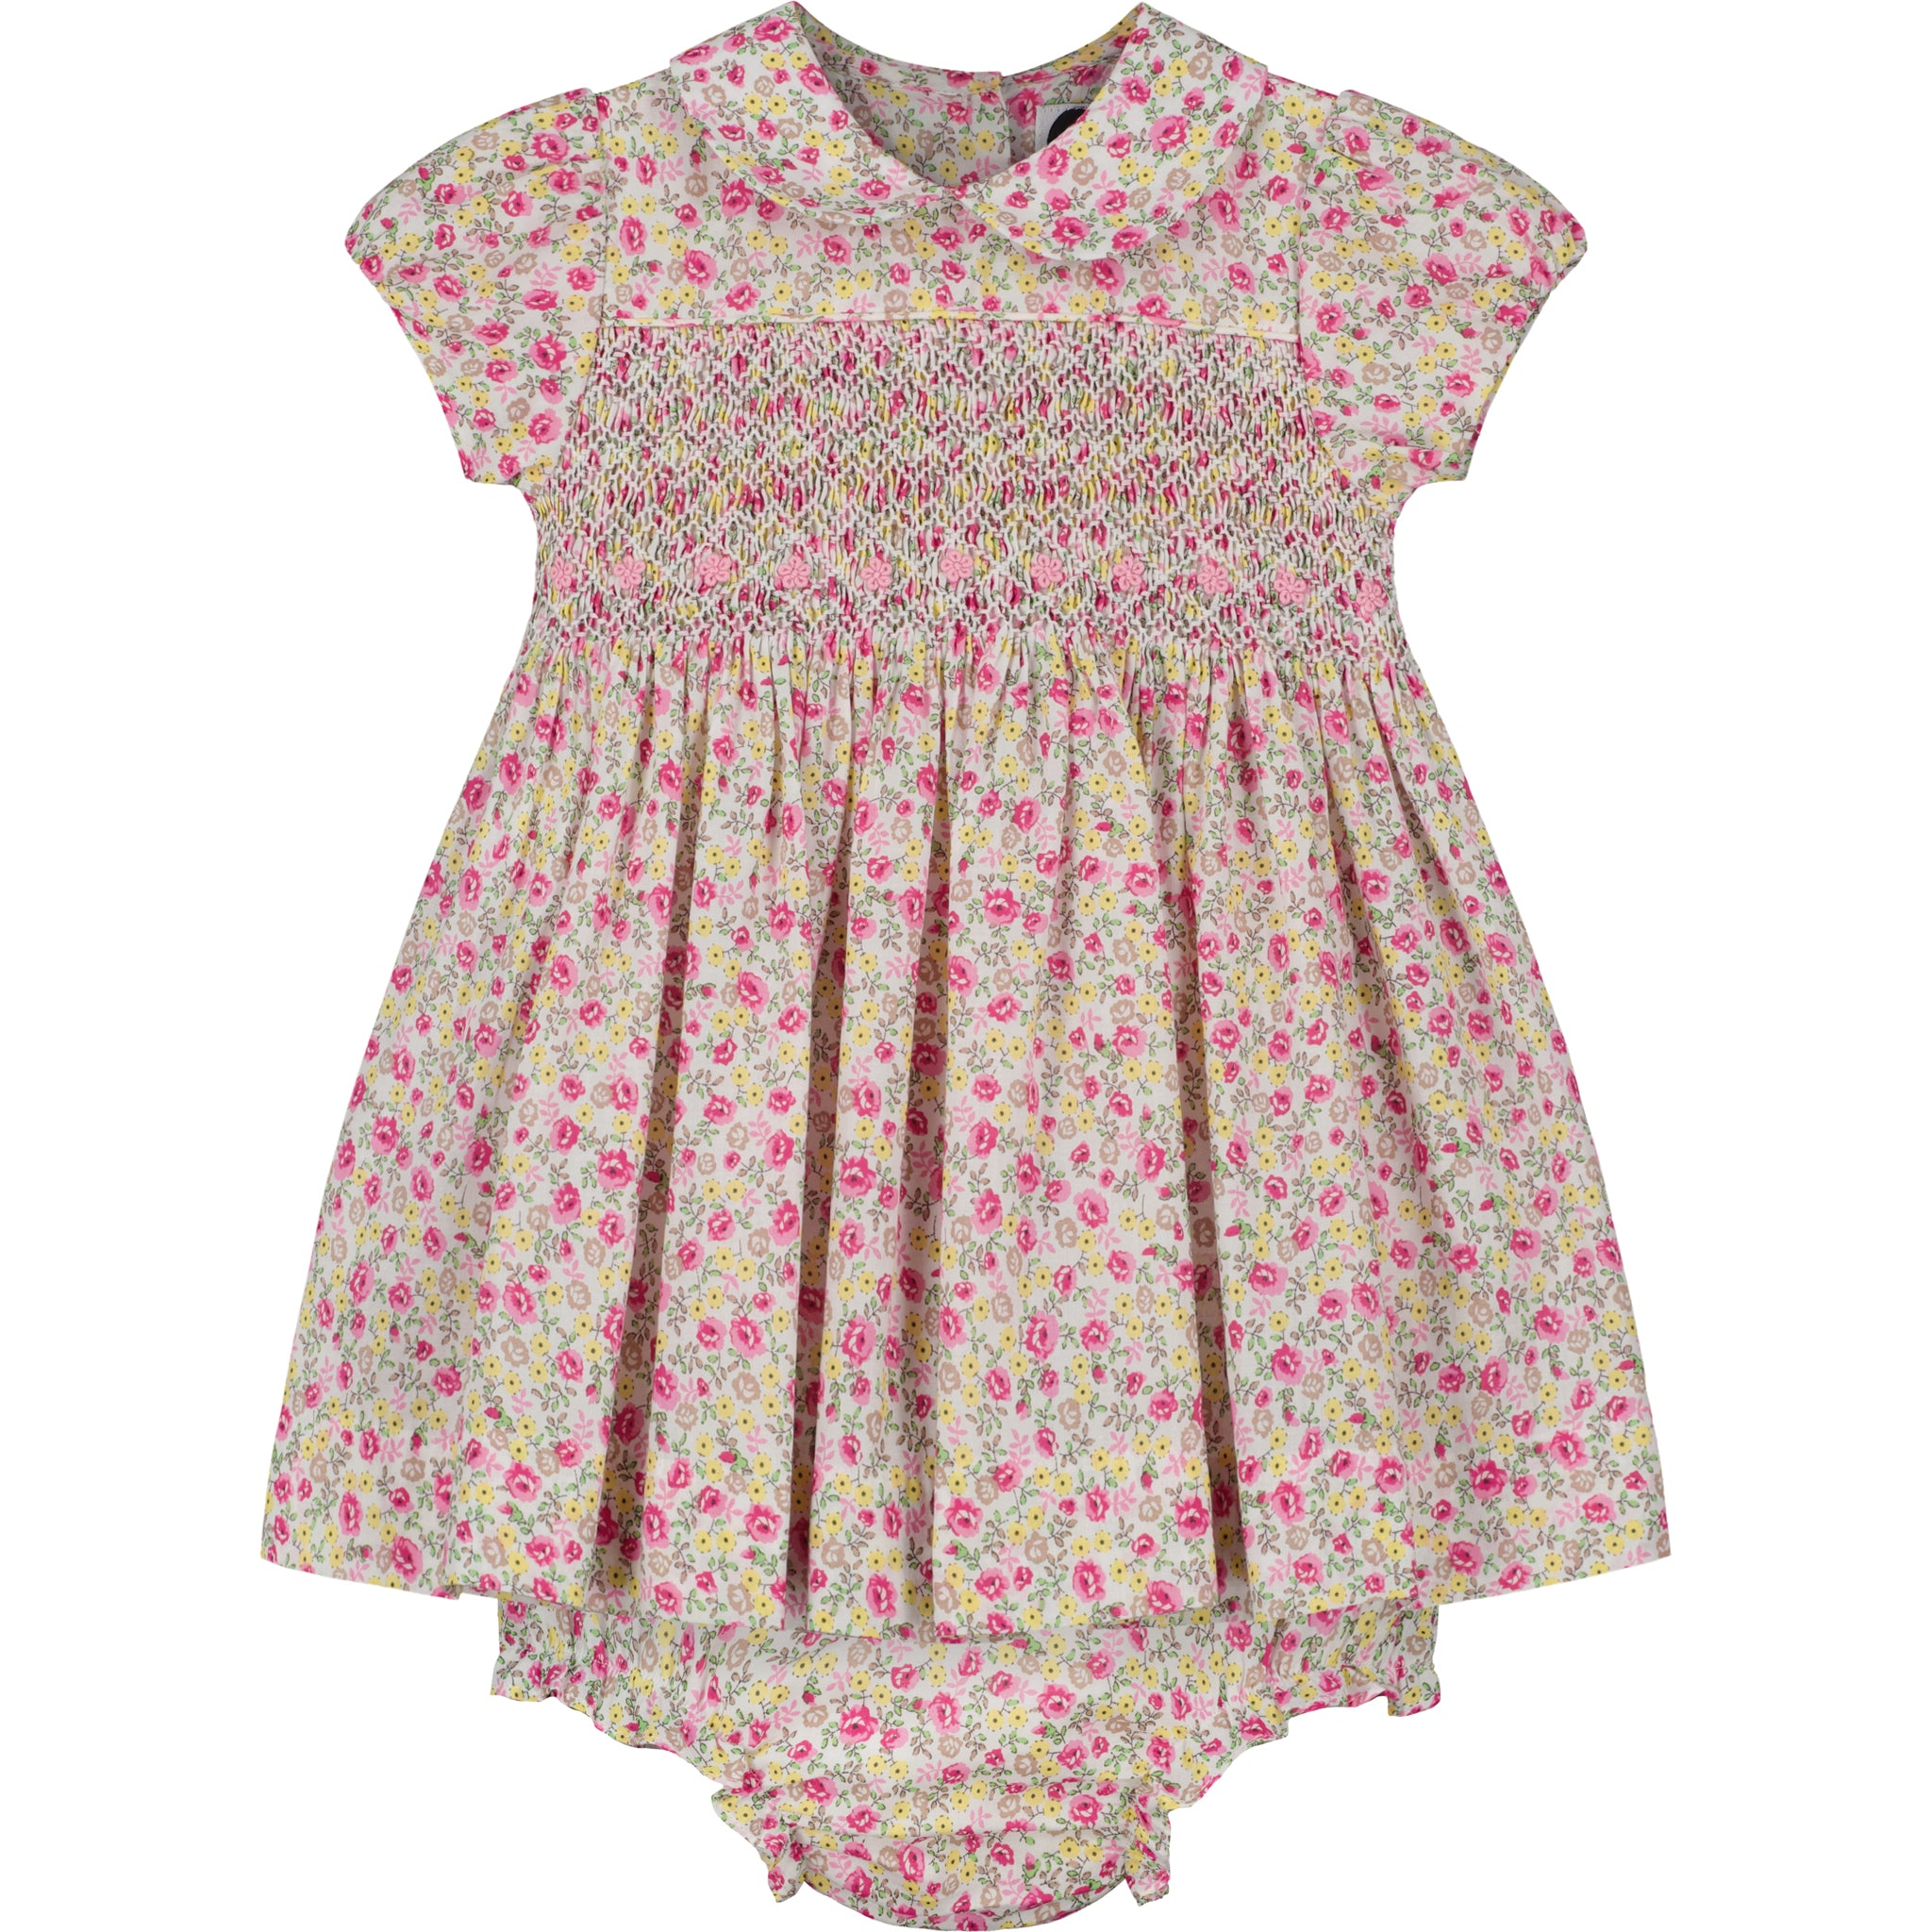 floral smocked baby dress with matching bloomers, fronyt